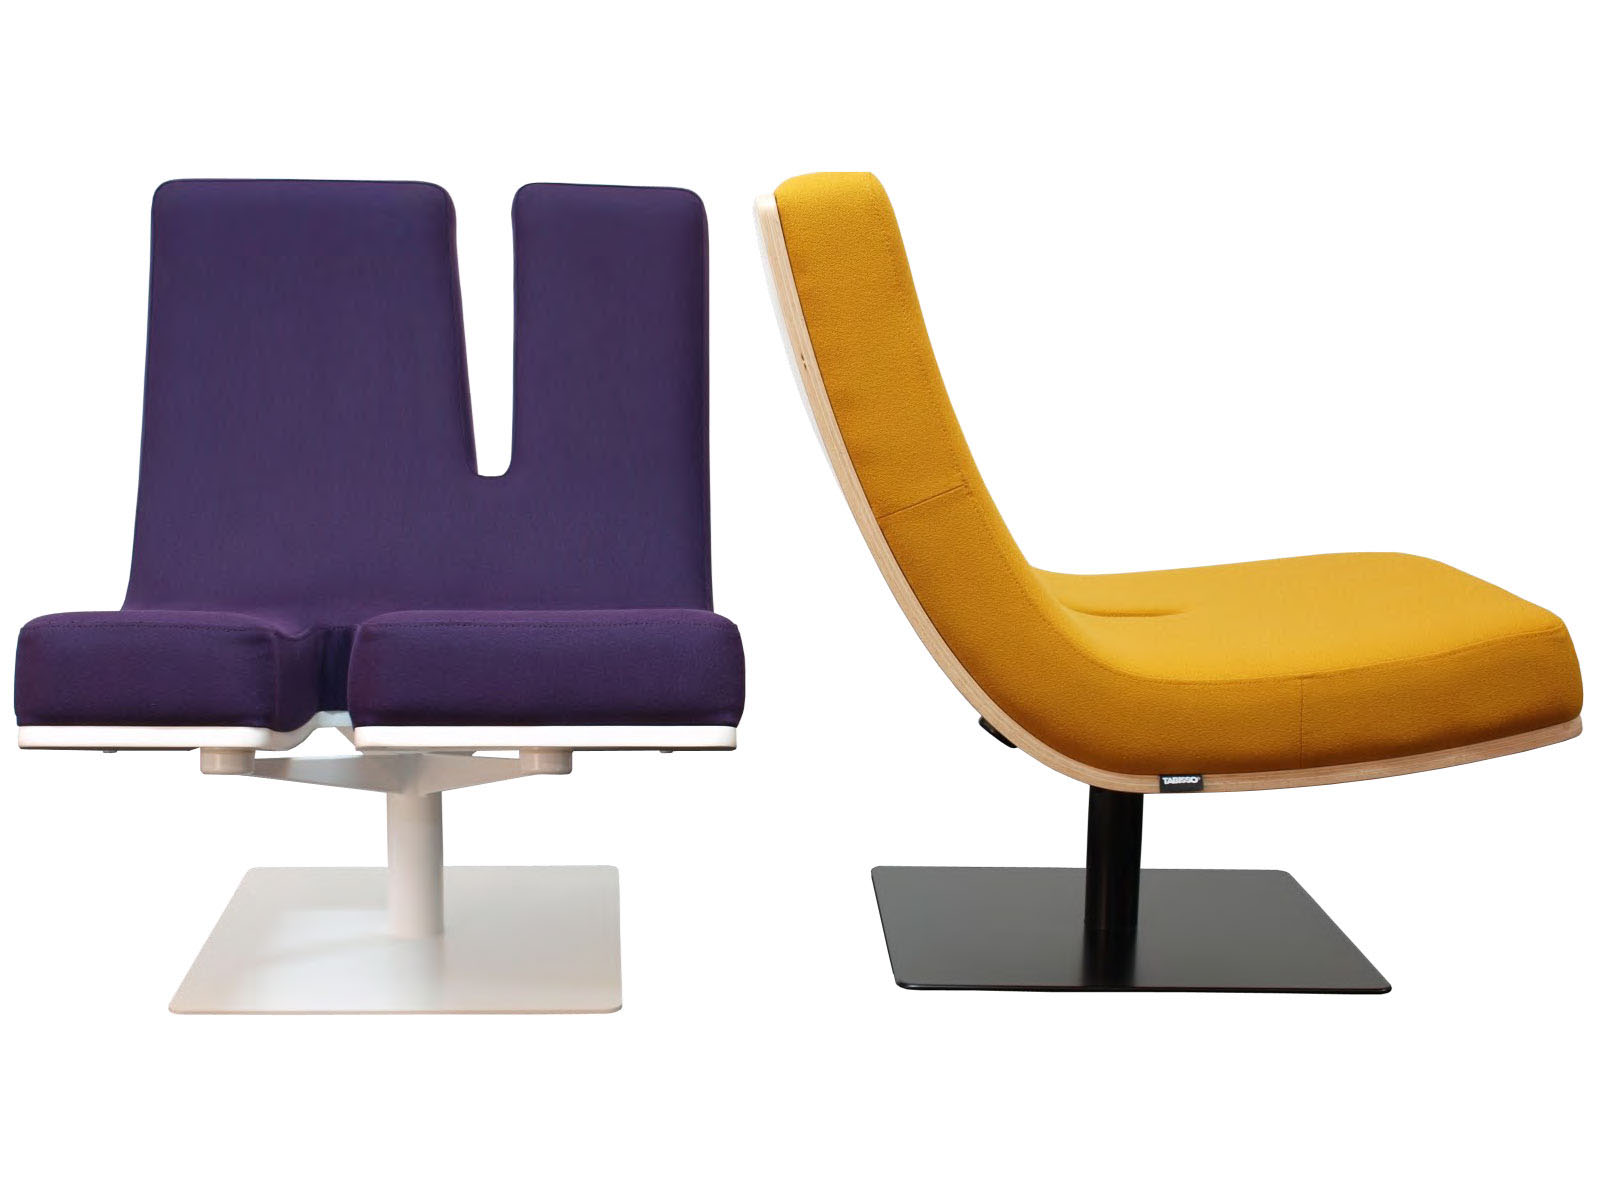 Chairs Design Tabisso Outstanding Chairs Design Of Typographic Tabisso With Letter Shapes And Have Purple And Yellow As Basic Color Furniture  Fantastic Unique Furniture Idea For Creating Personalized Rooms 